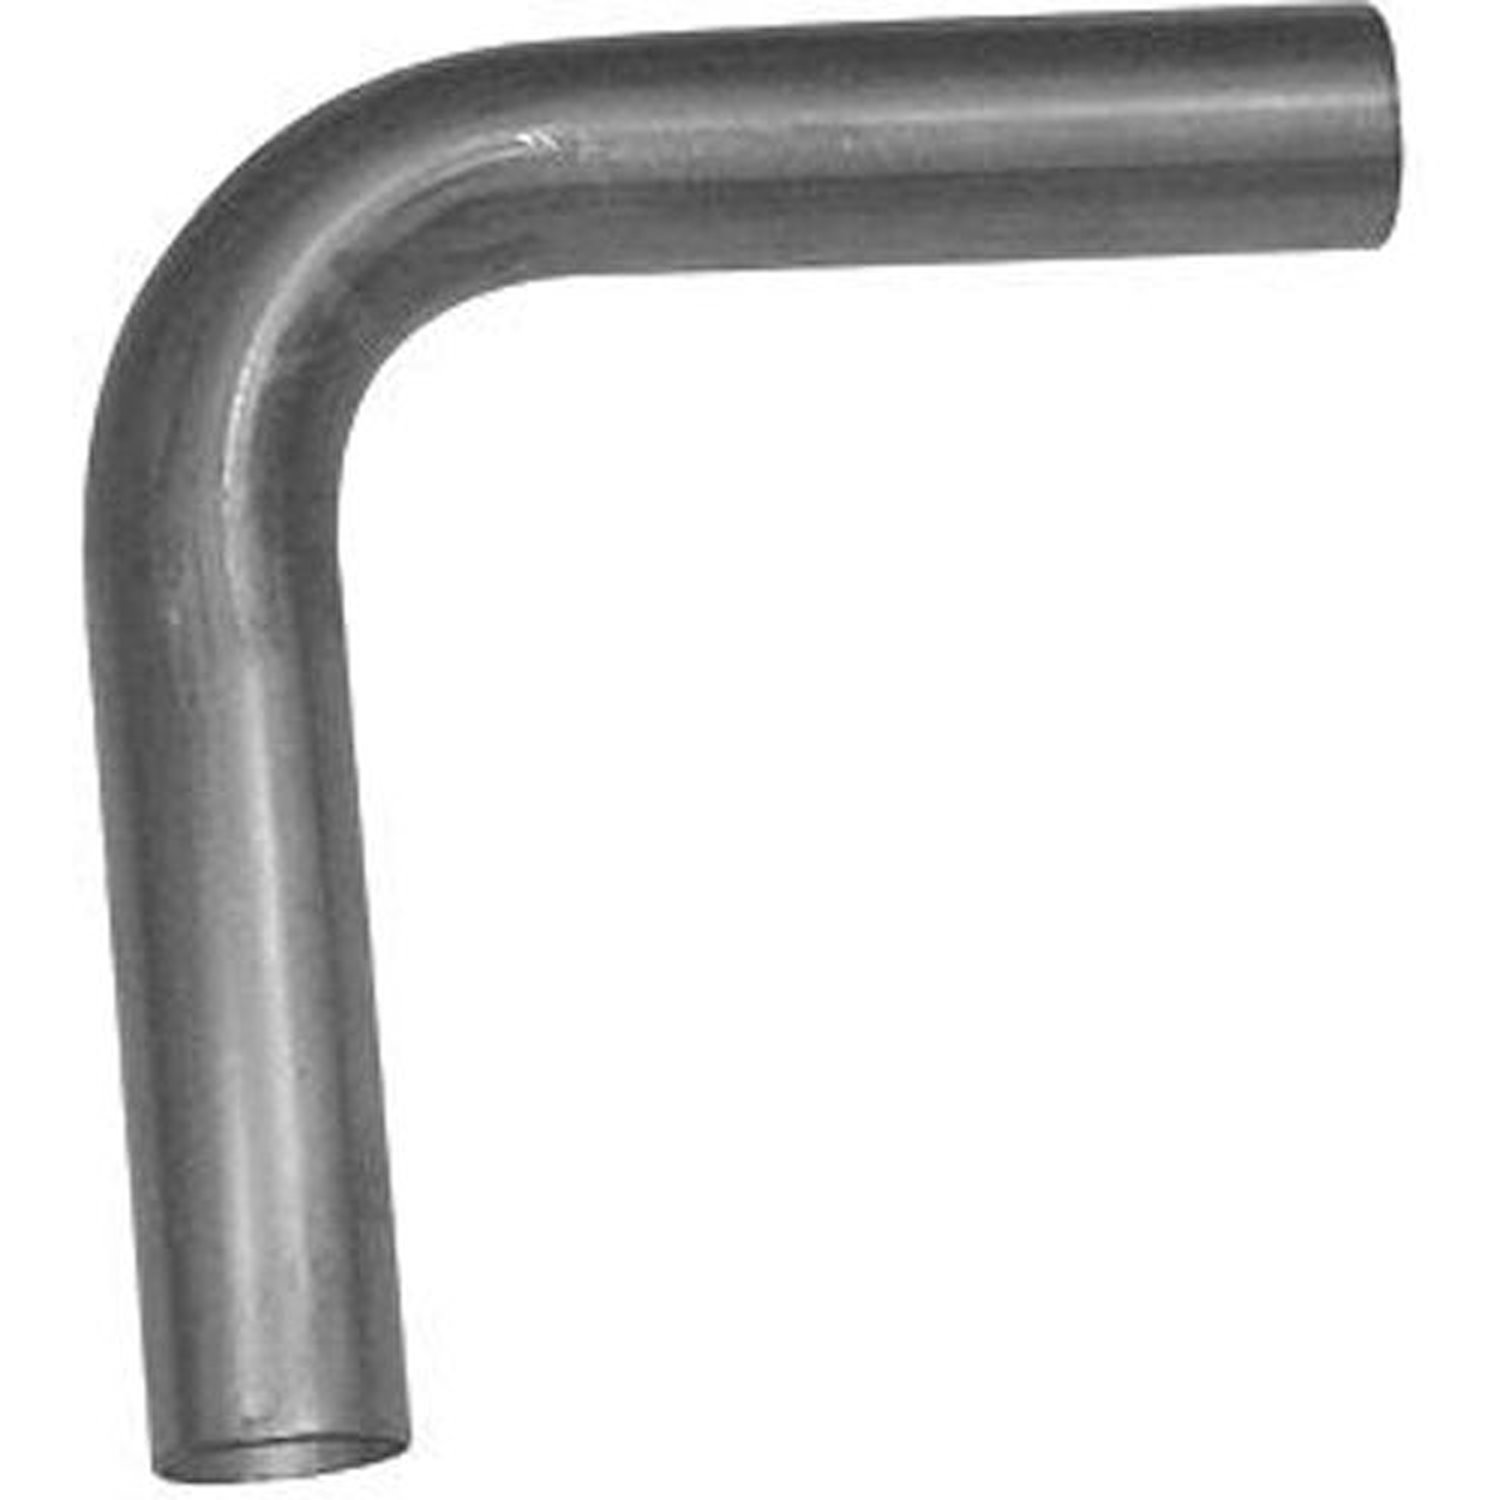 Stainless Steel 90° 2-1/2" Exhaust Bend